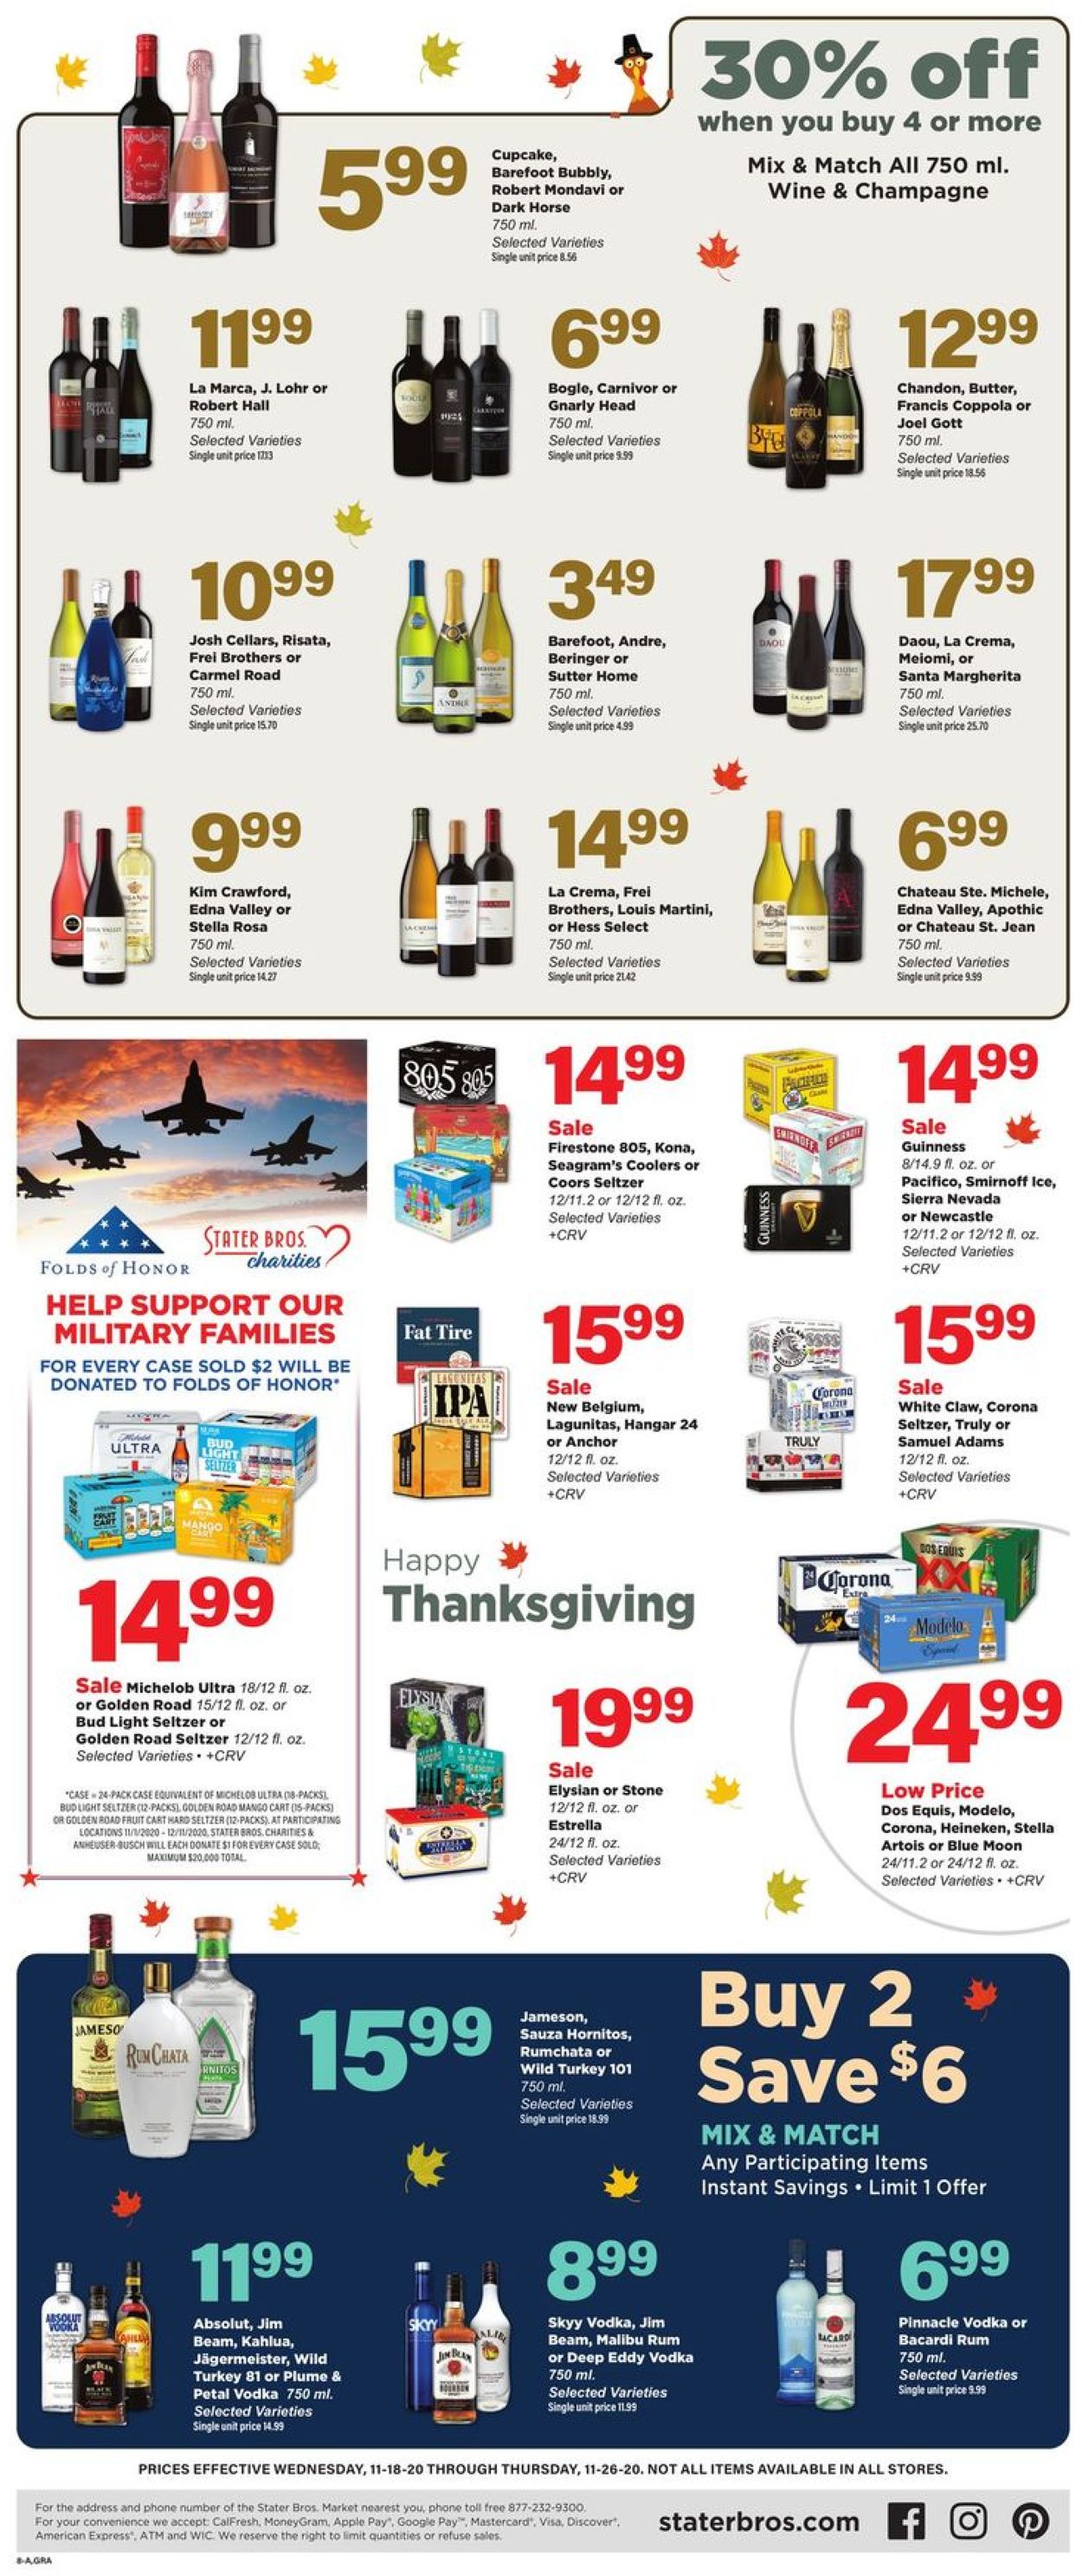 Catalogue Stater Bros. Thanksgiving ad 2020 from 11/18/2020